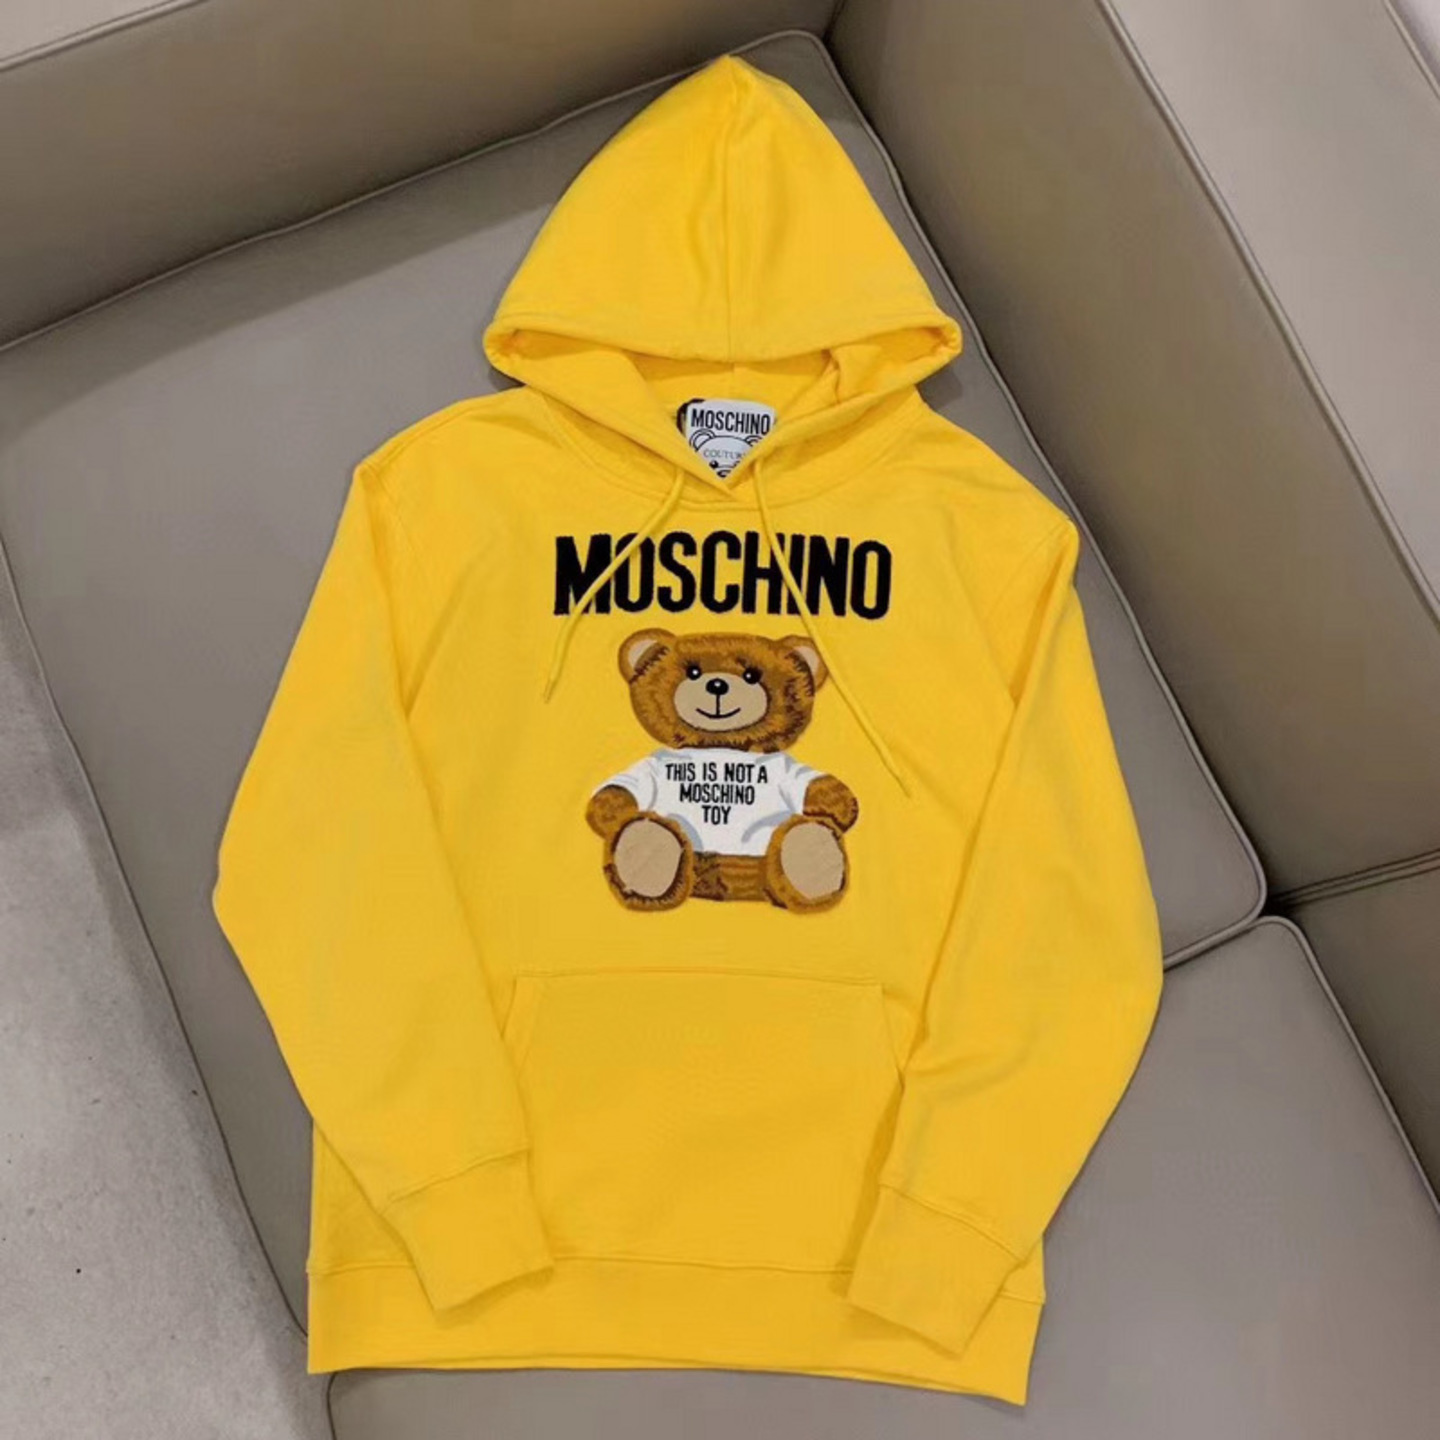 Moschino This Is Not a Moschino Toy Hoodie